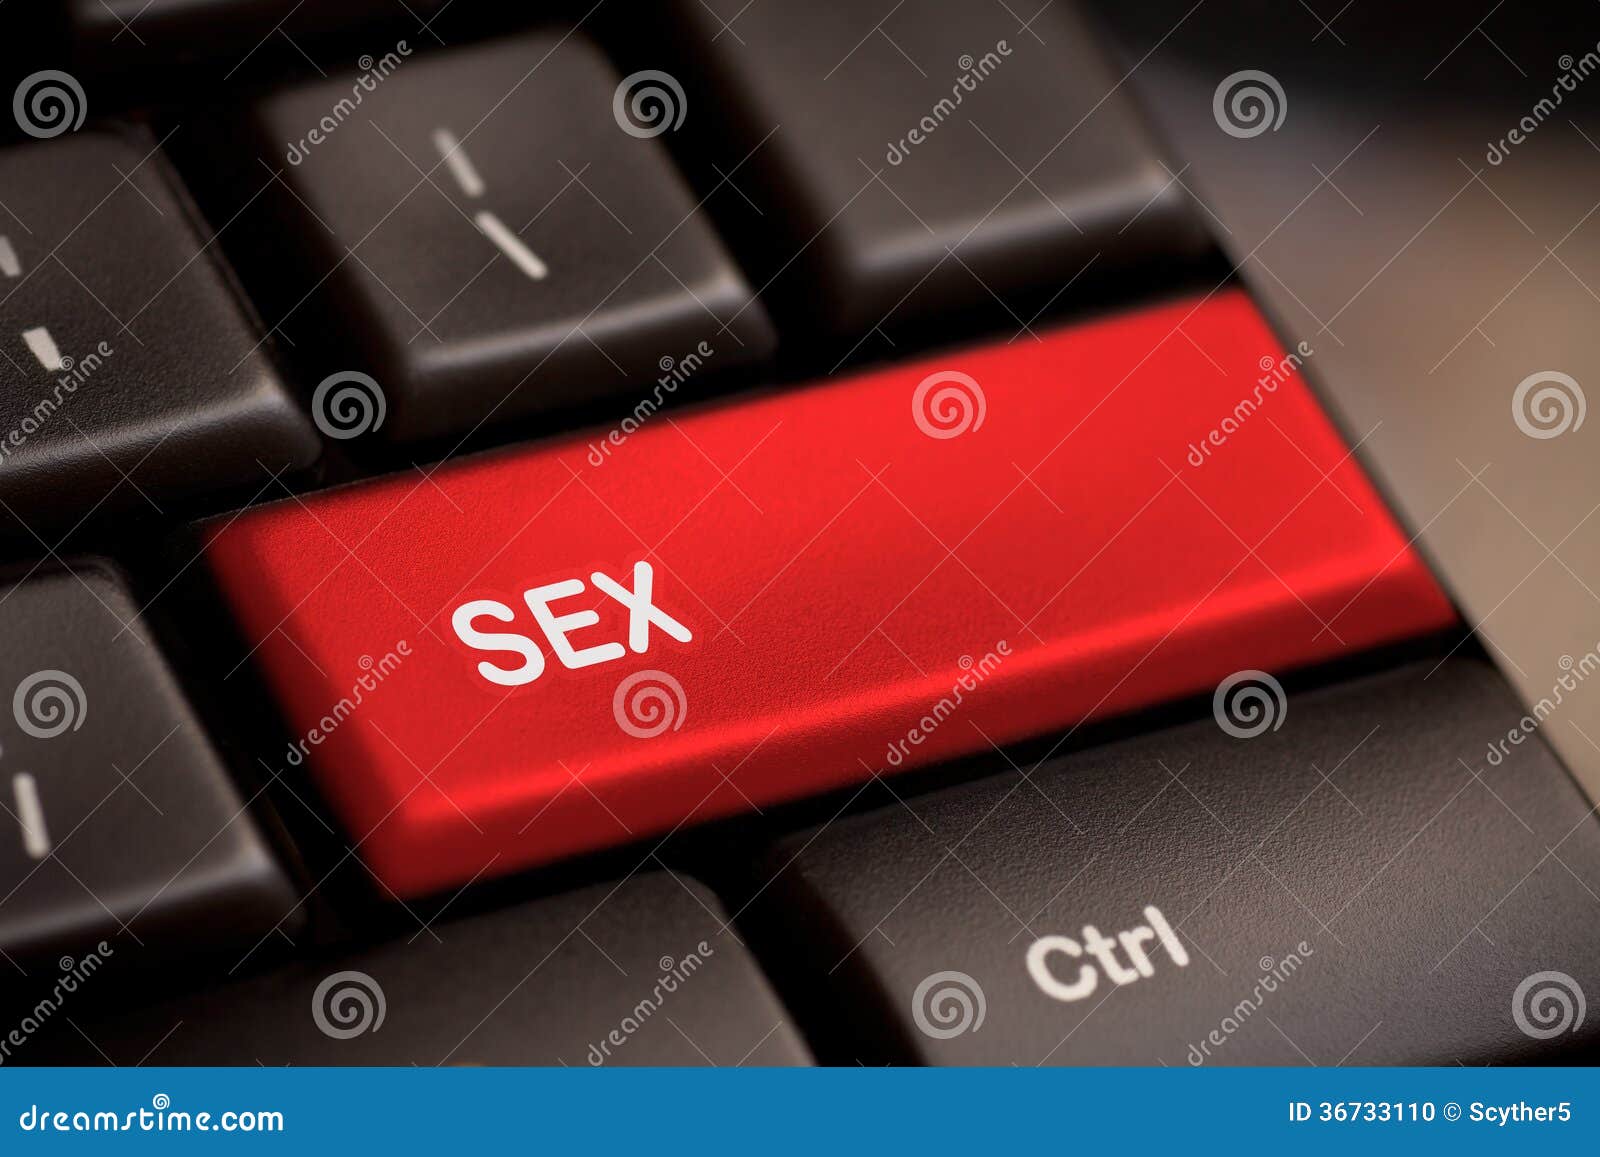 sex button on keyboard